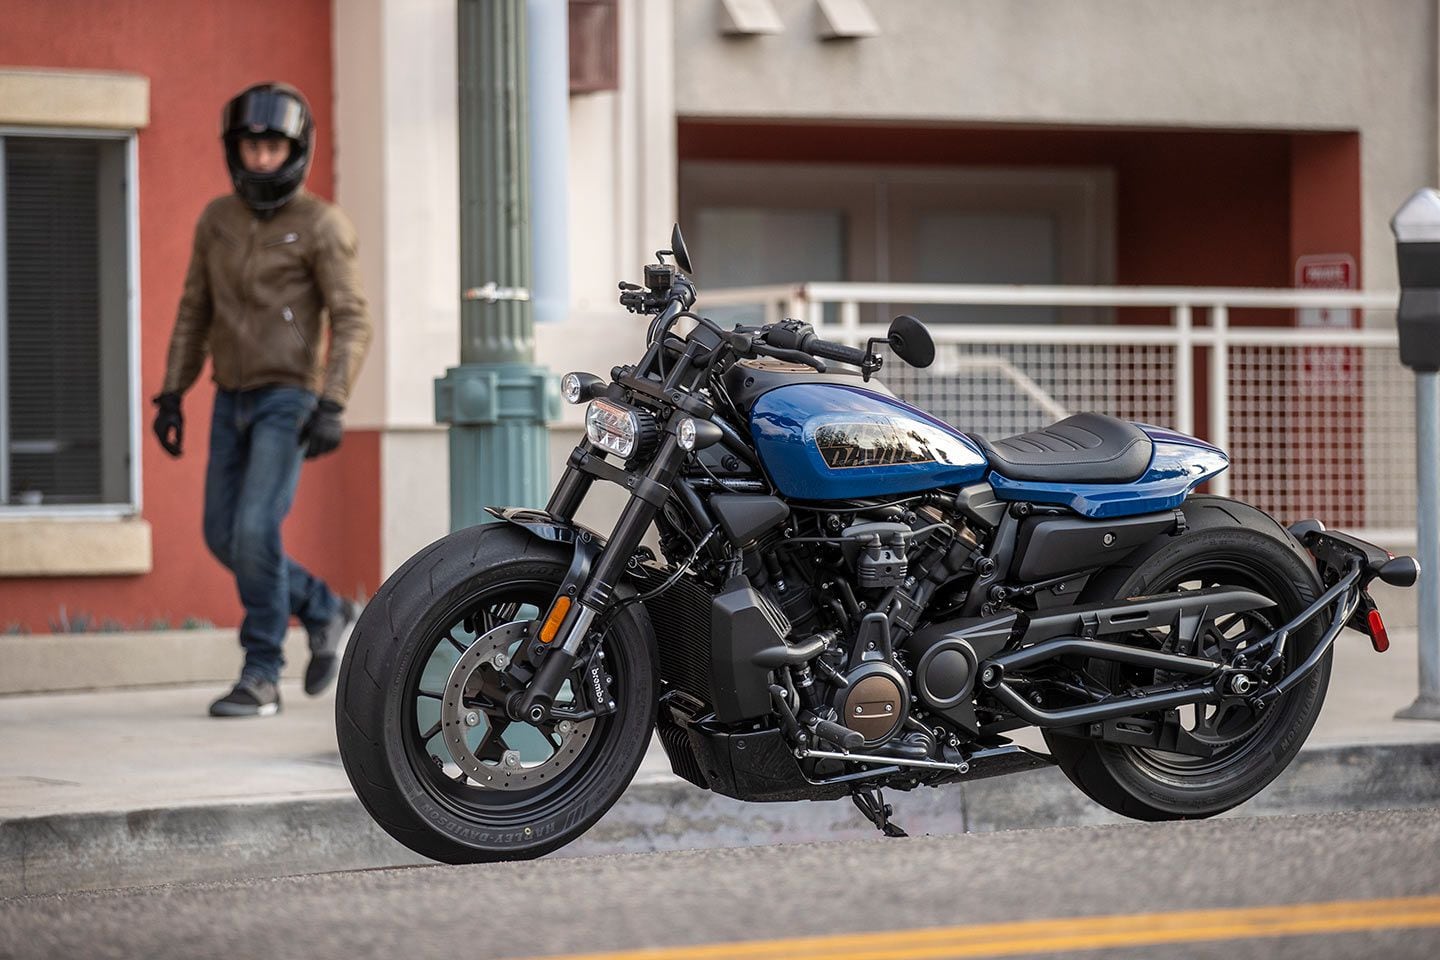 The new Harley-Davidson Sportster S: style and substance